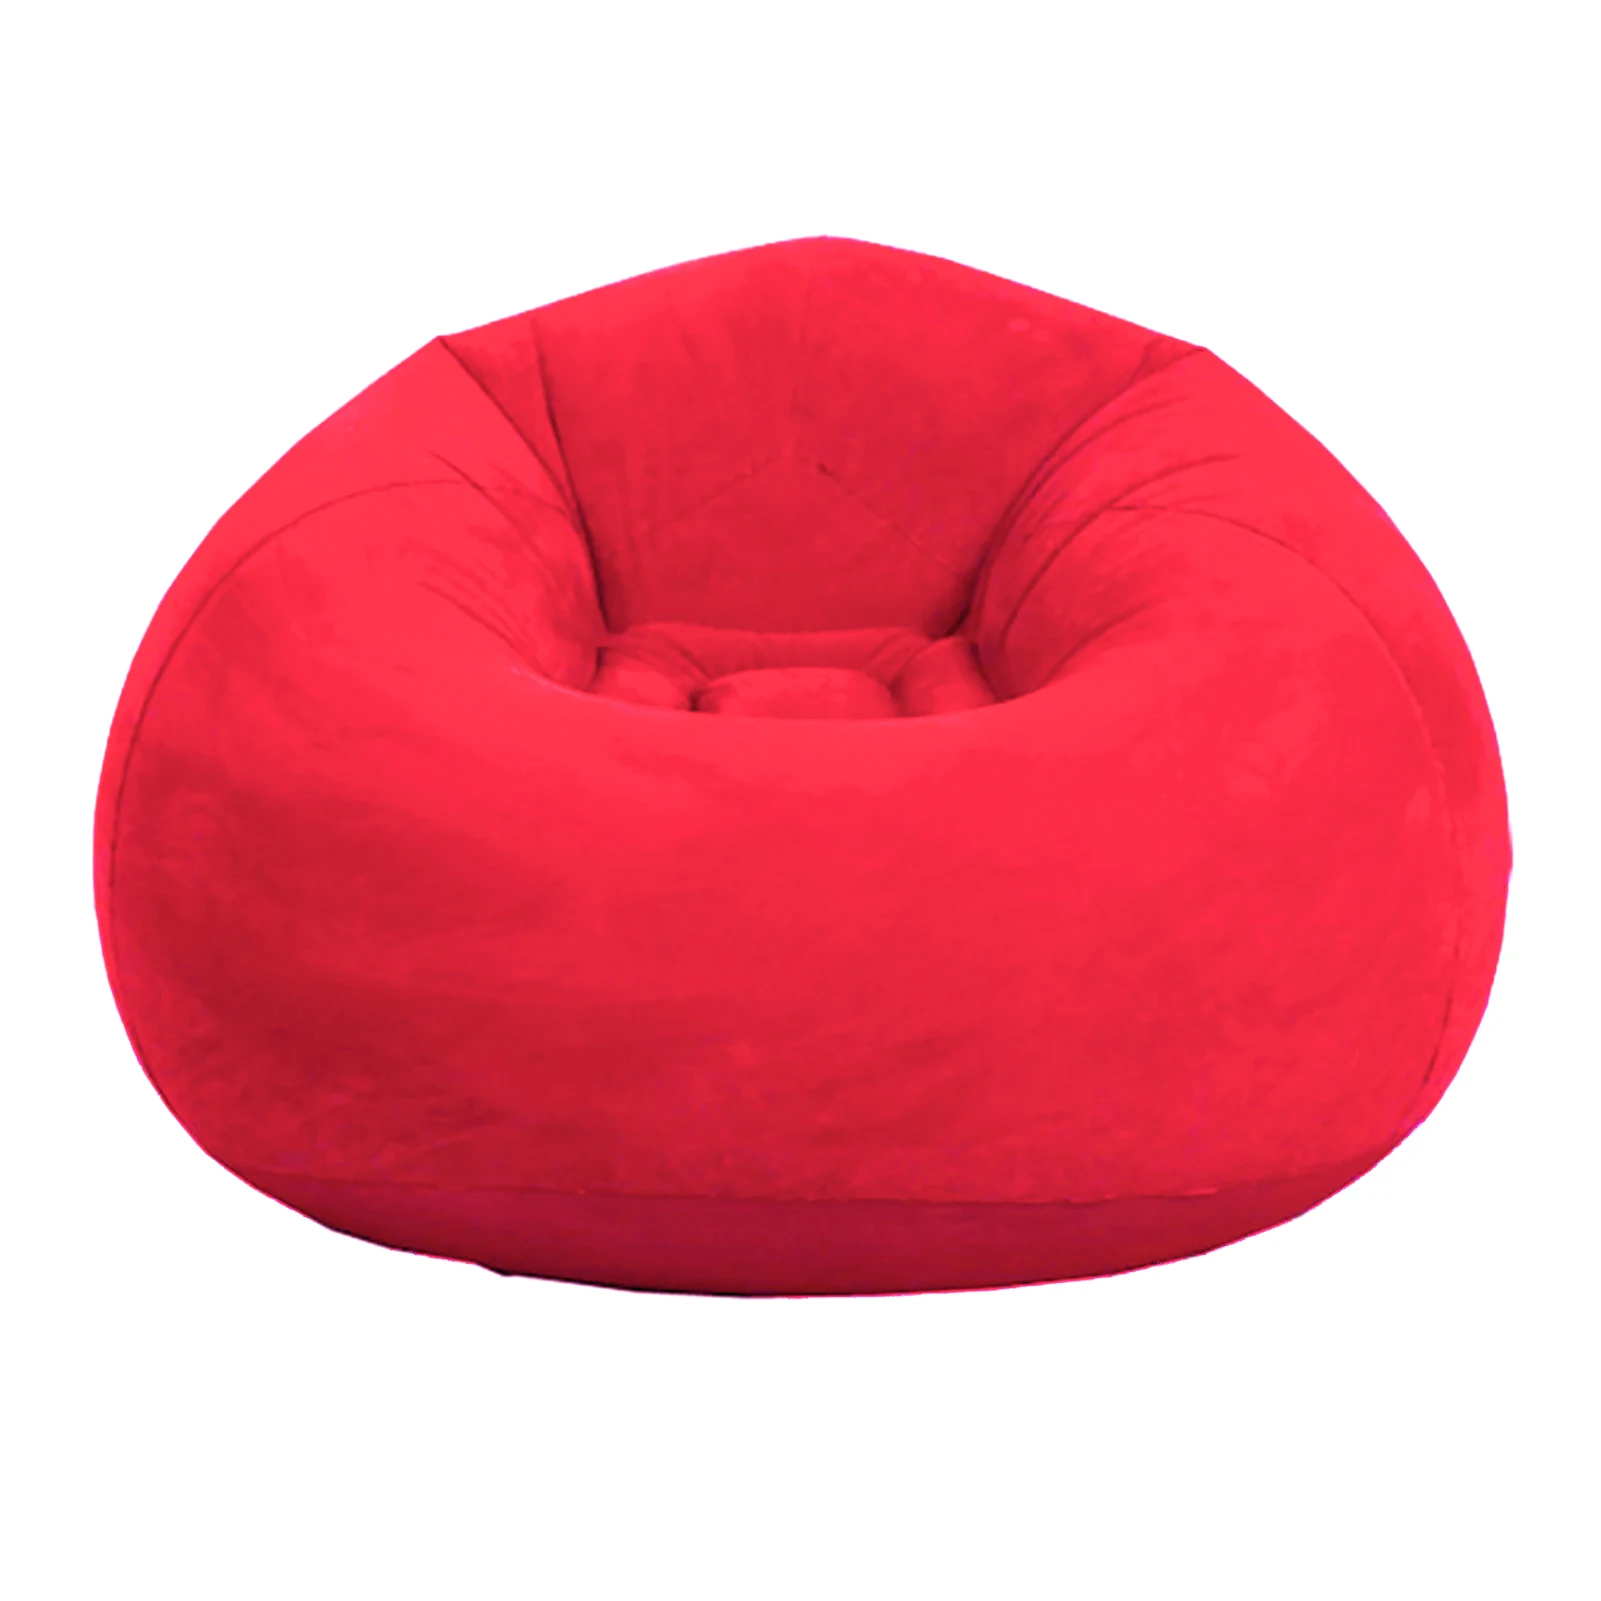 Living Room Bean Bag Chair Inflatable Lazy Sofa Outdoor Couch Washable Lounger Ultra Soft Folding Home Decoration Comfortable